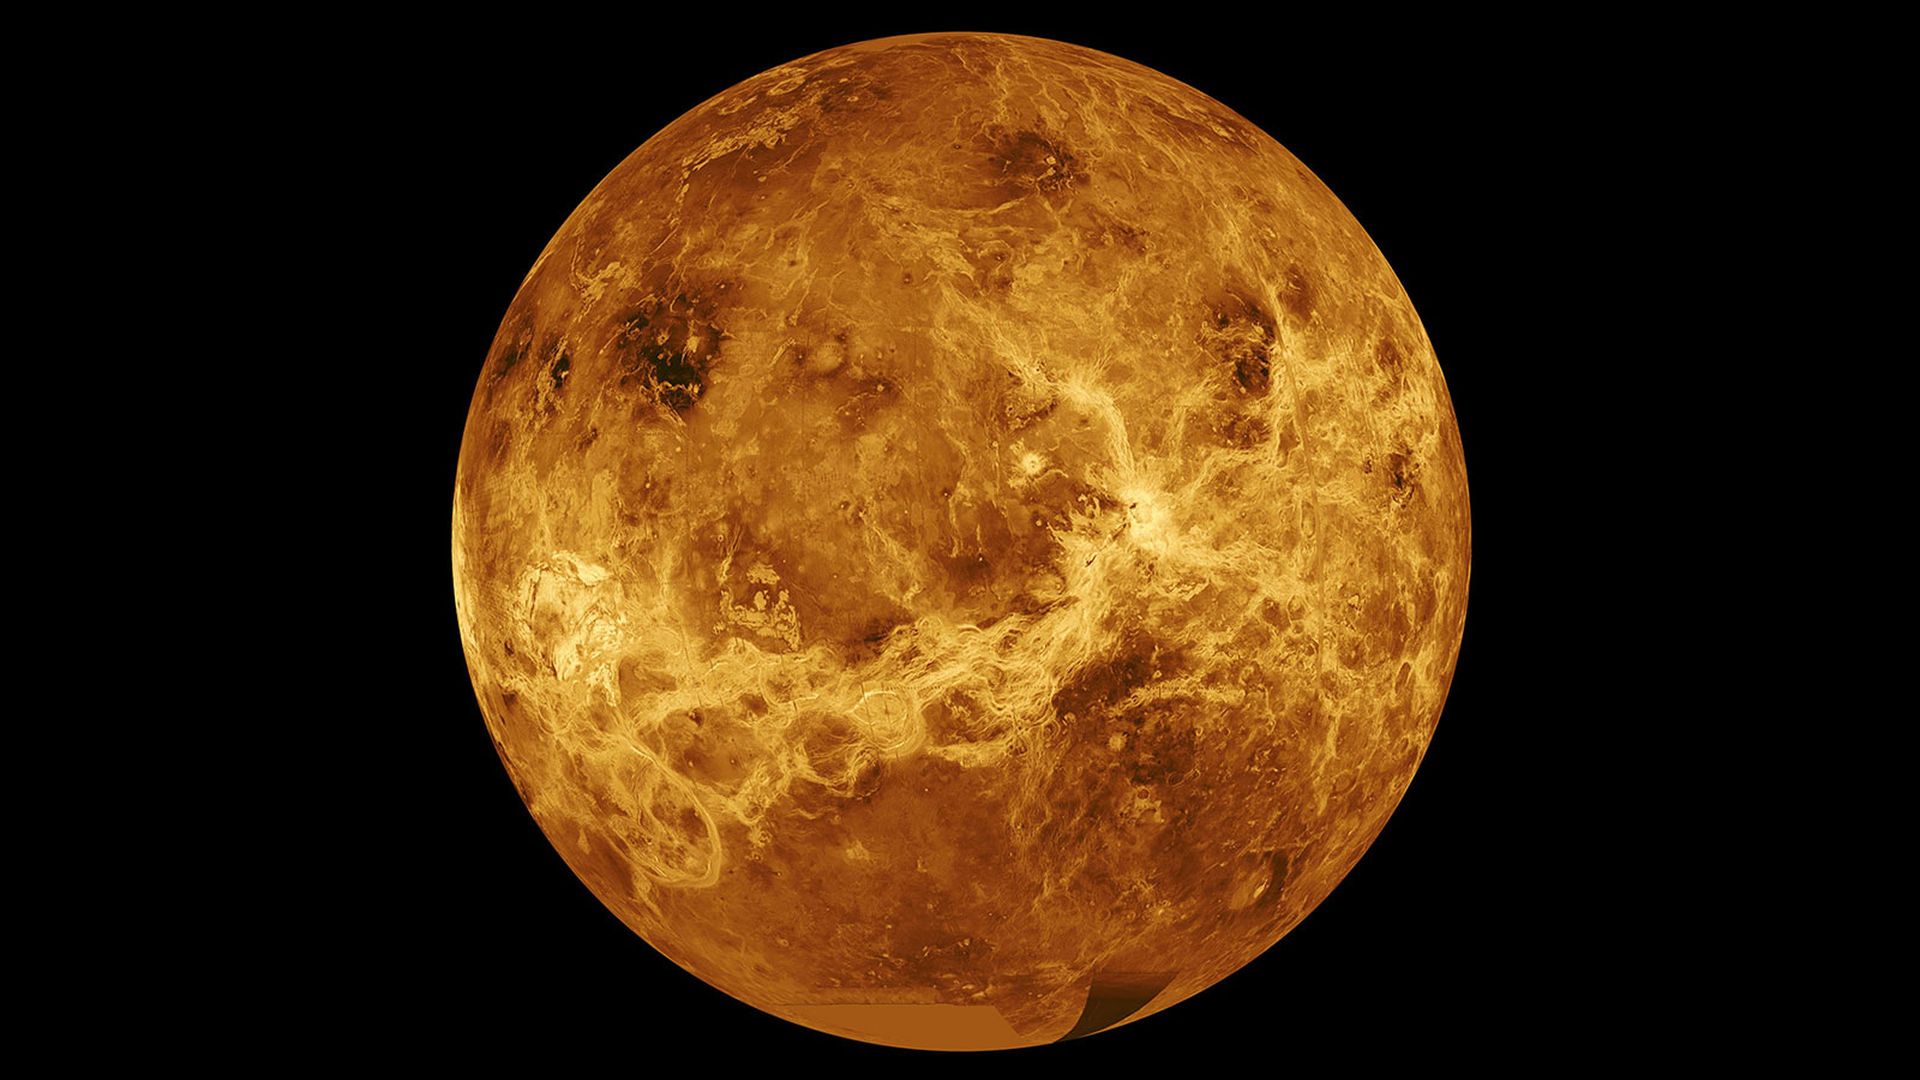 A view of the planet Venus shining in yellow light